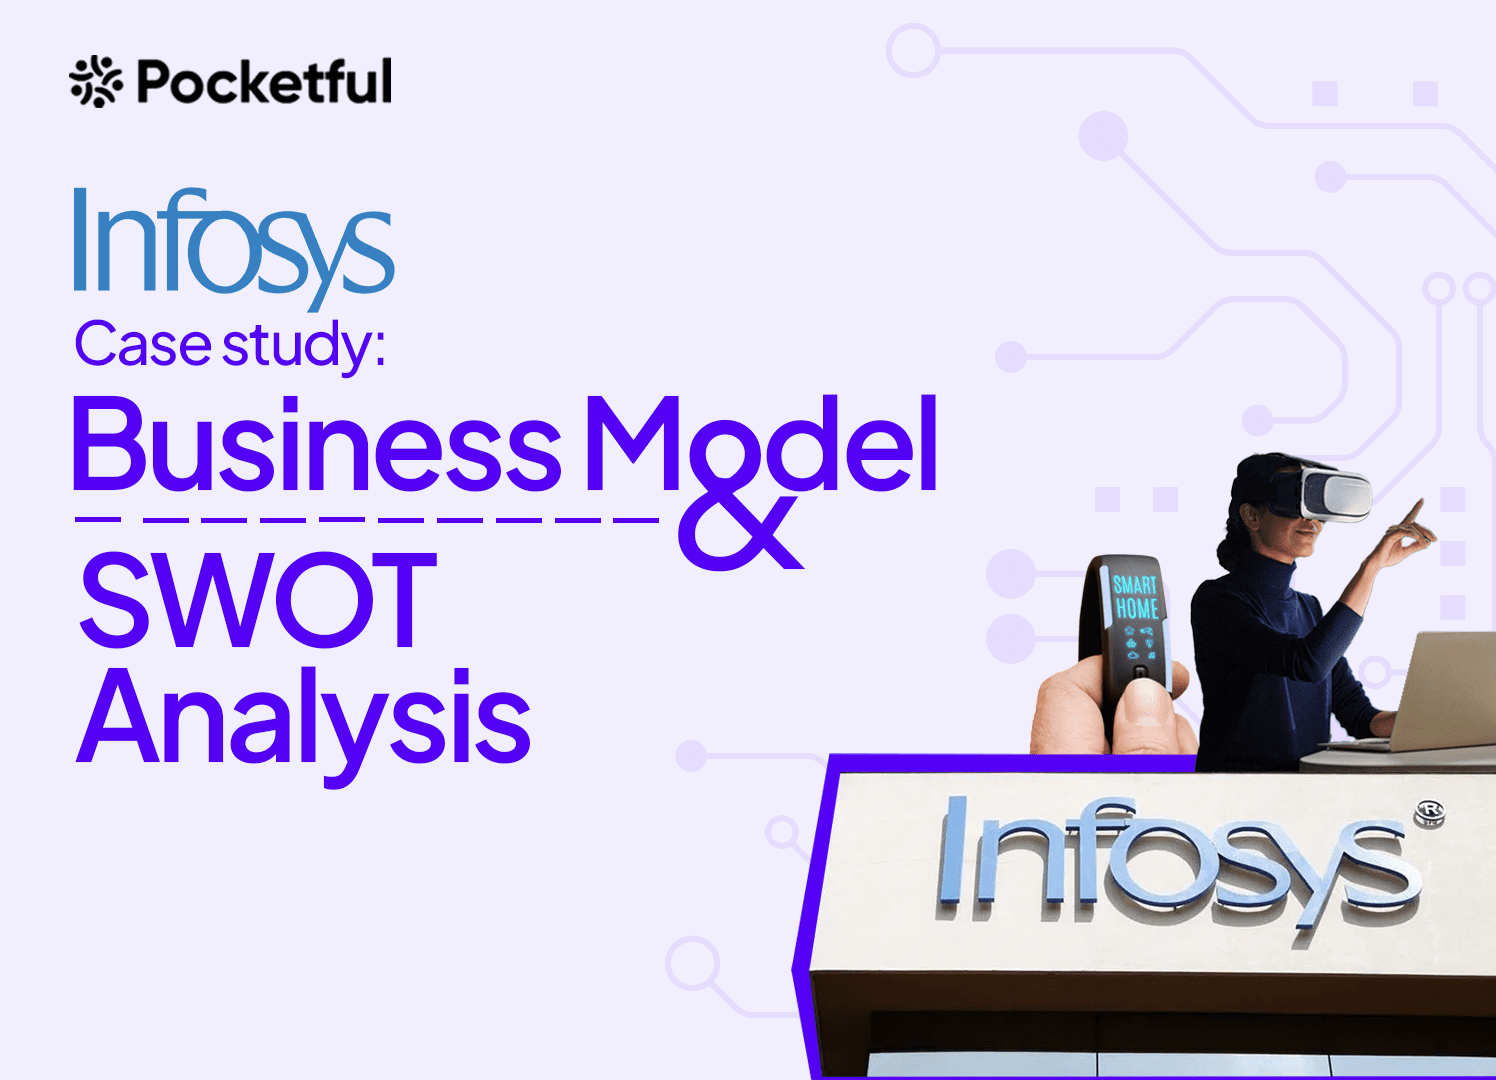 Infosys Case Study: Business Model and SWOT Analysis